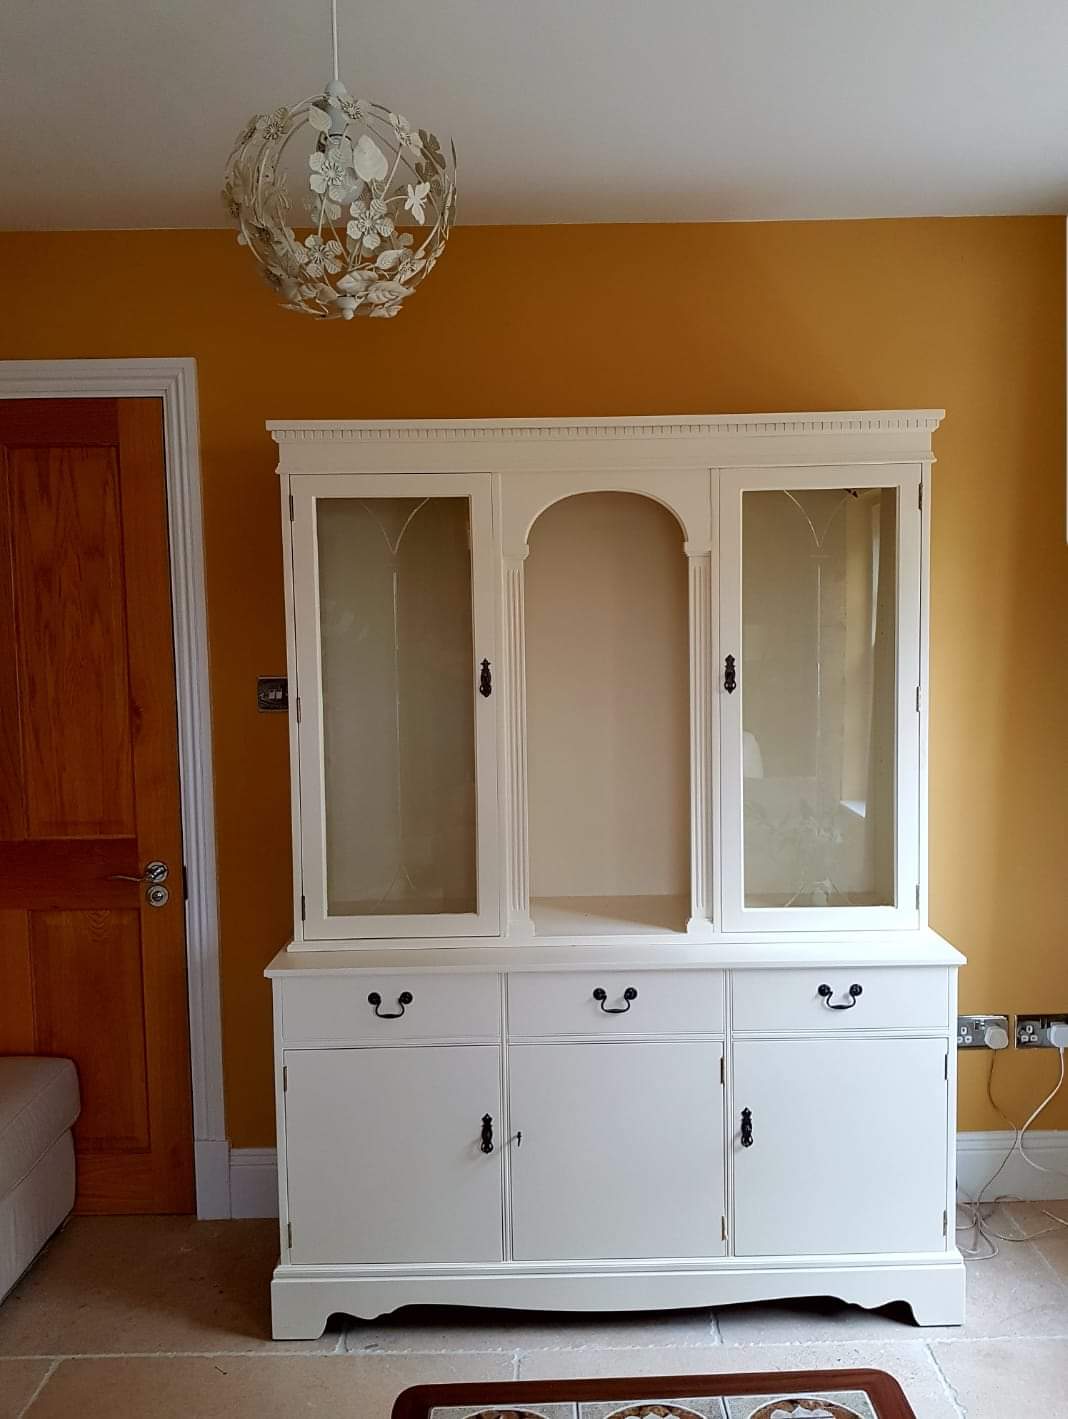 Spray painted dresser matched to kitchen colours